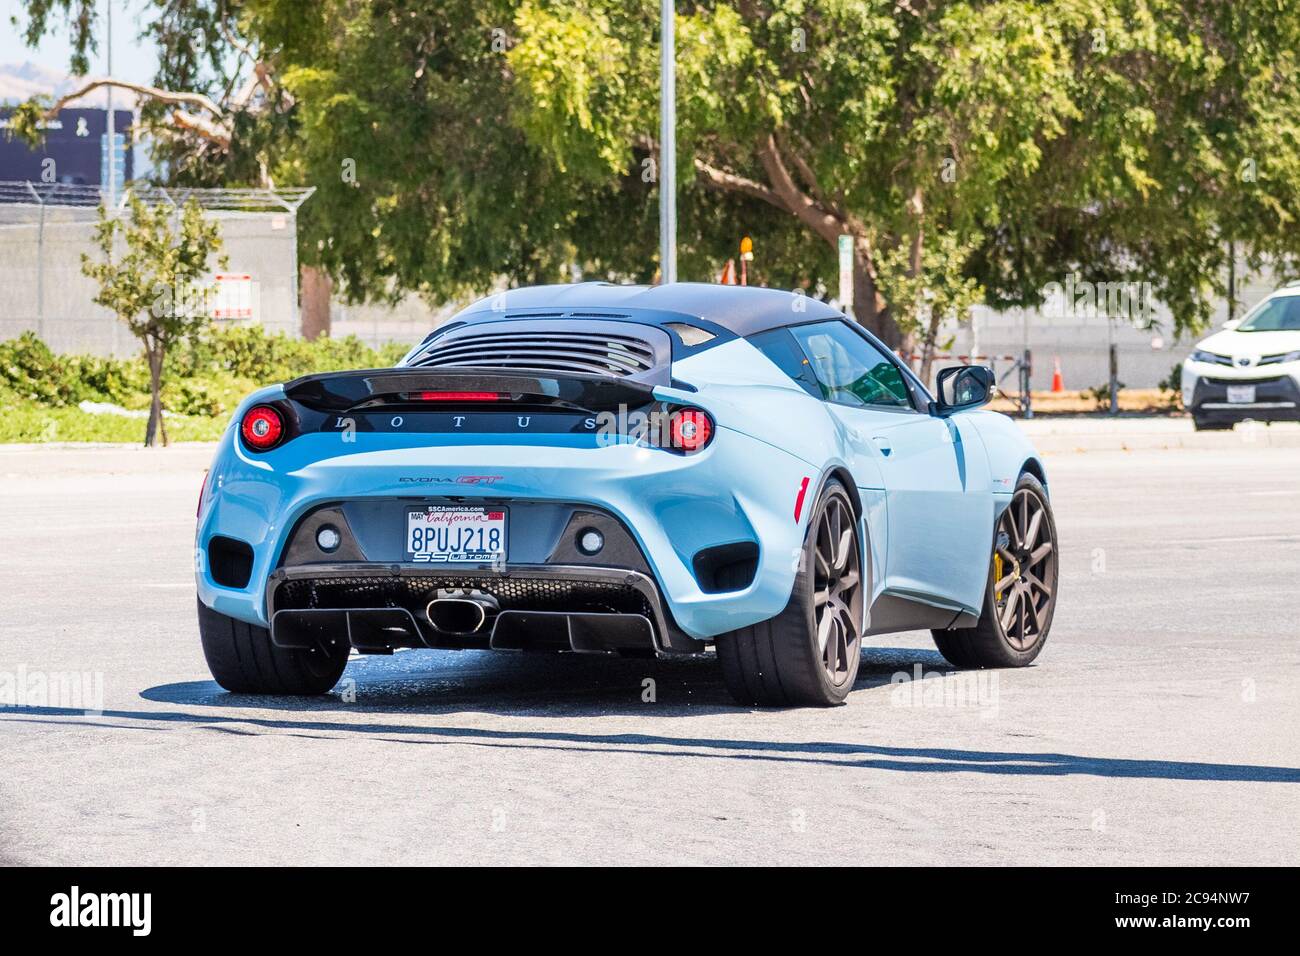 July 22, 2020 San Jose / CA / USA - Lotus Evora GT vehicle driving in Silicon Valley; Lotus Cars Limited is a British automotive company that manufact Stock Photo